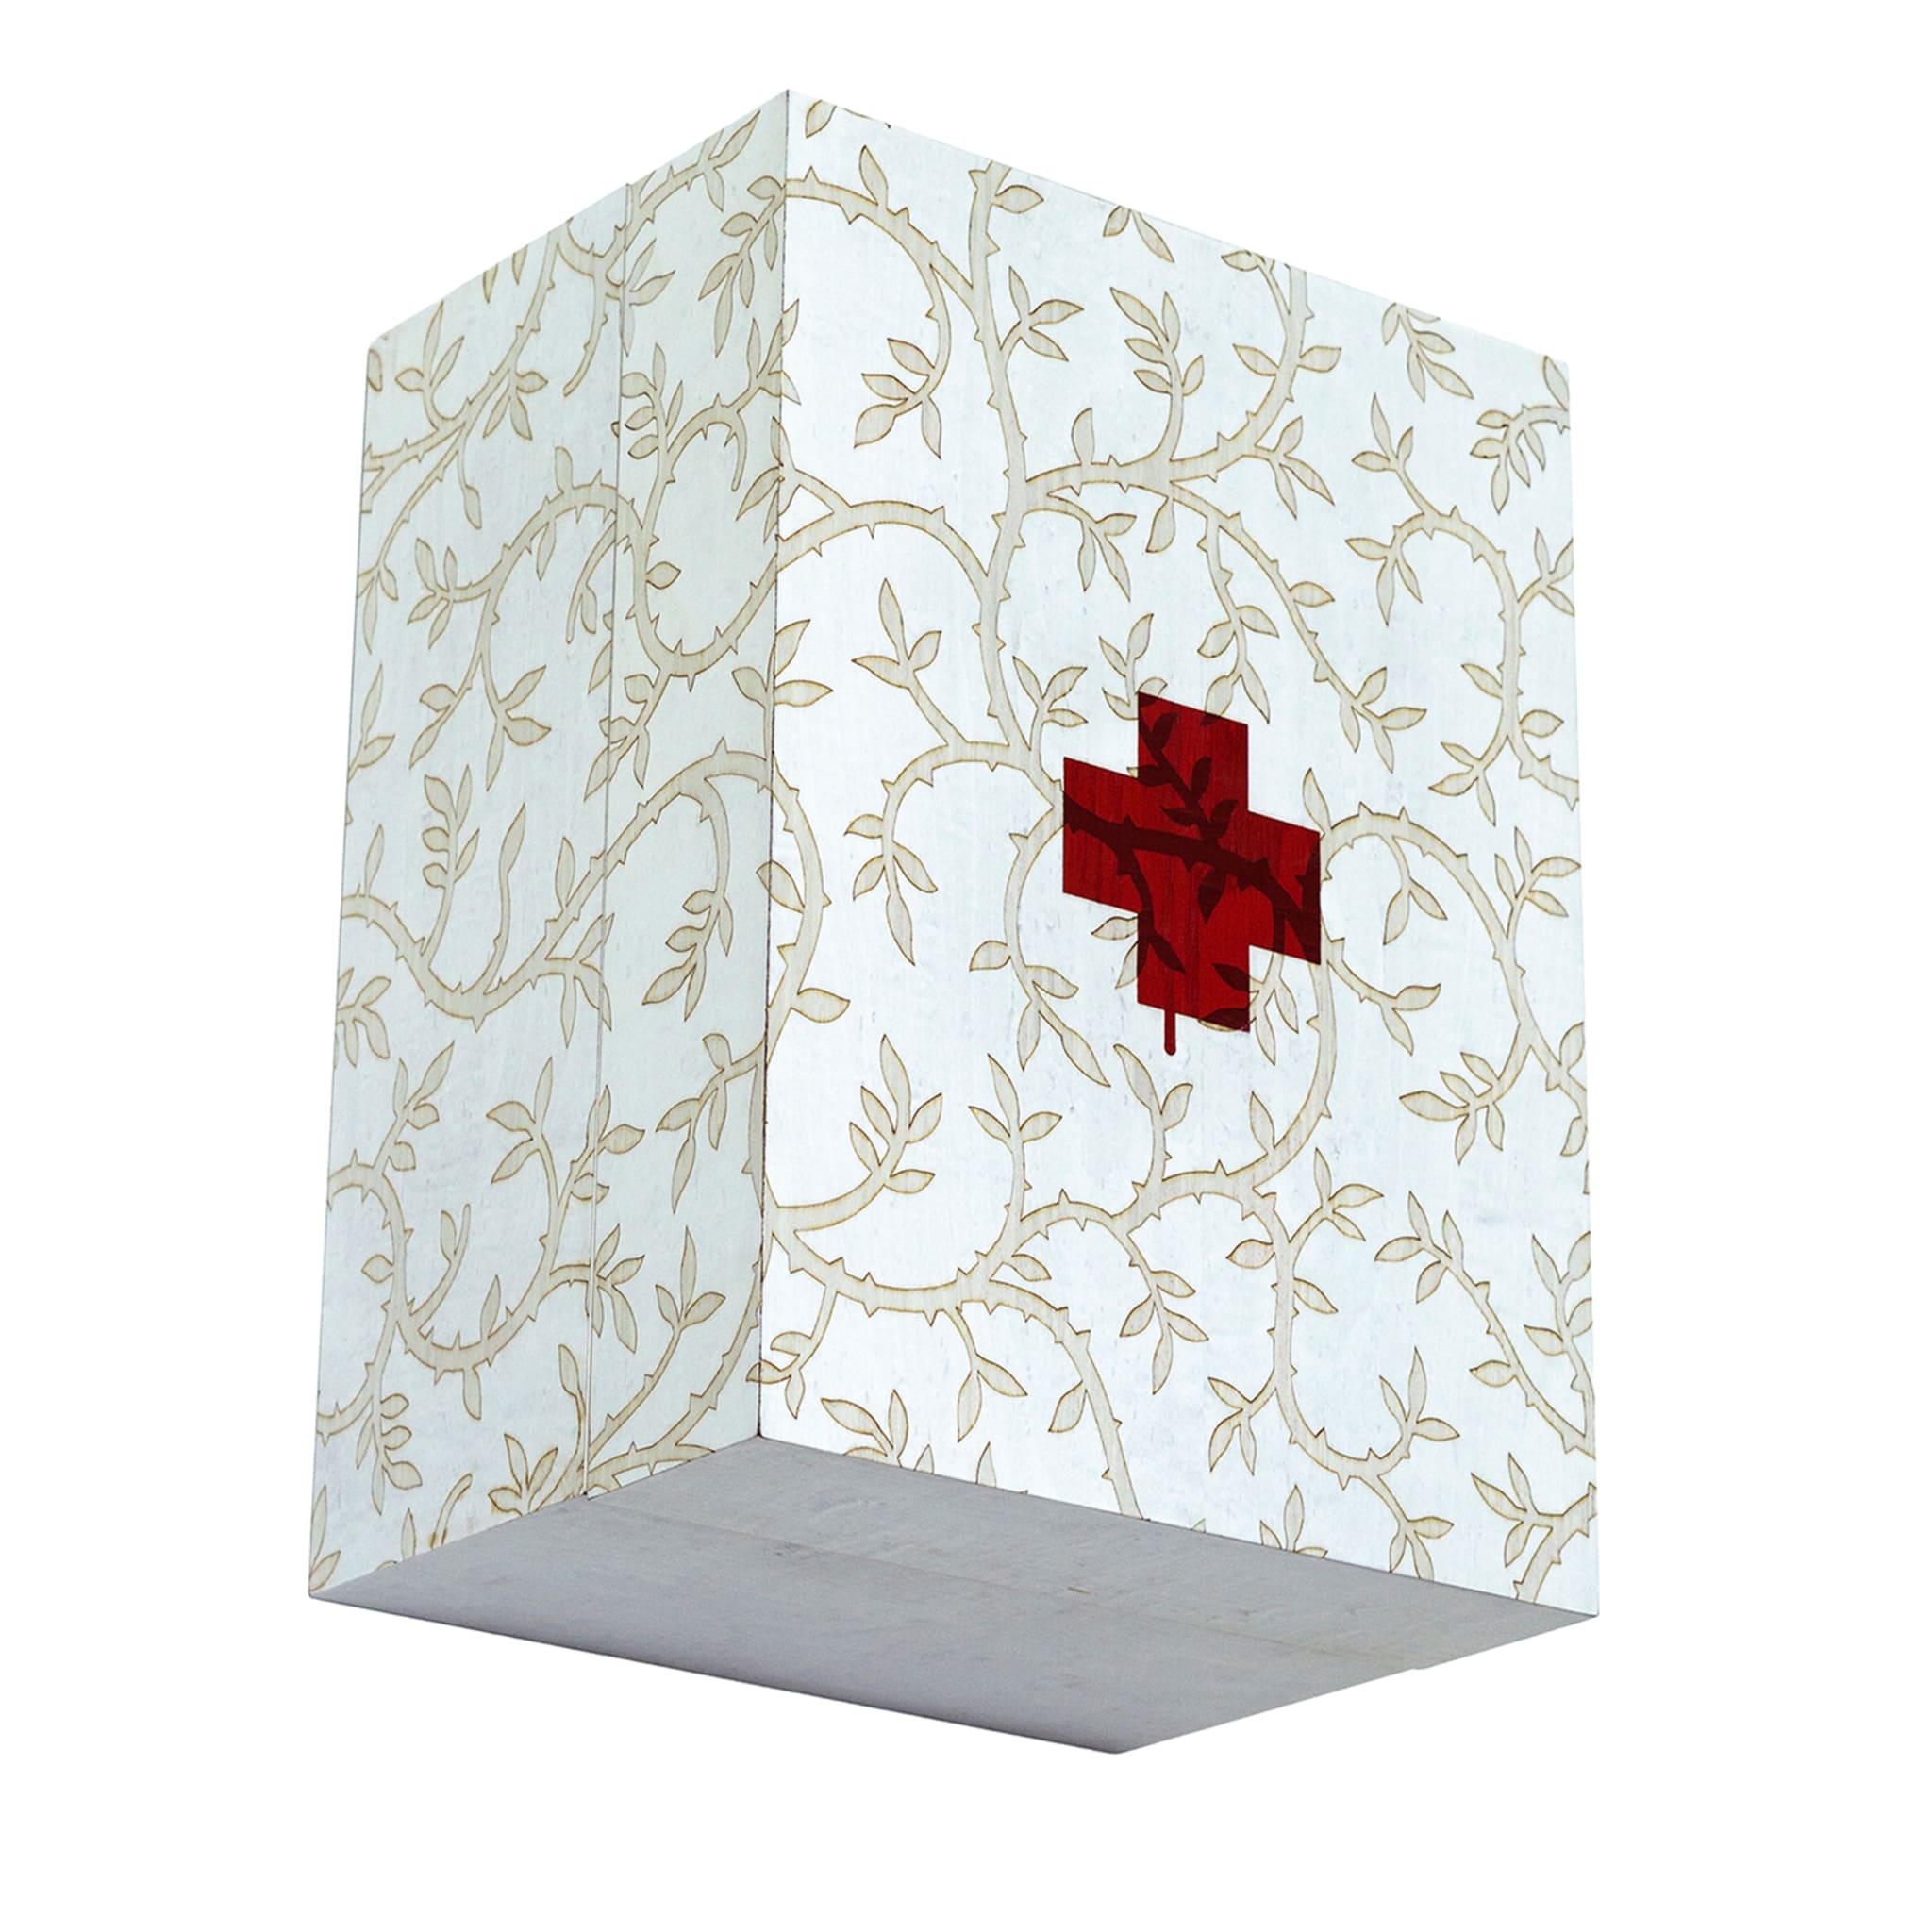 Beige and Red First Aid Box - Main view